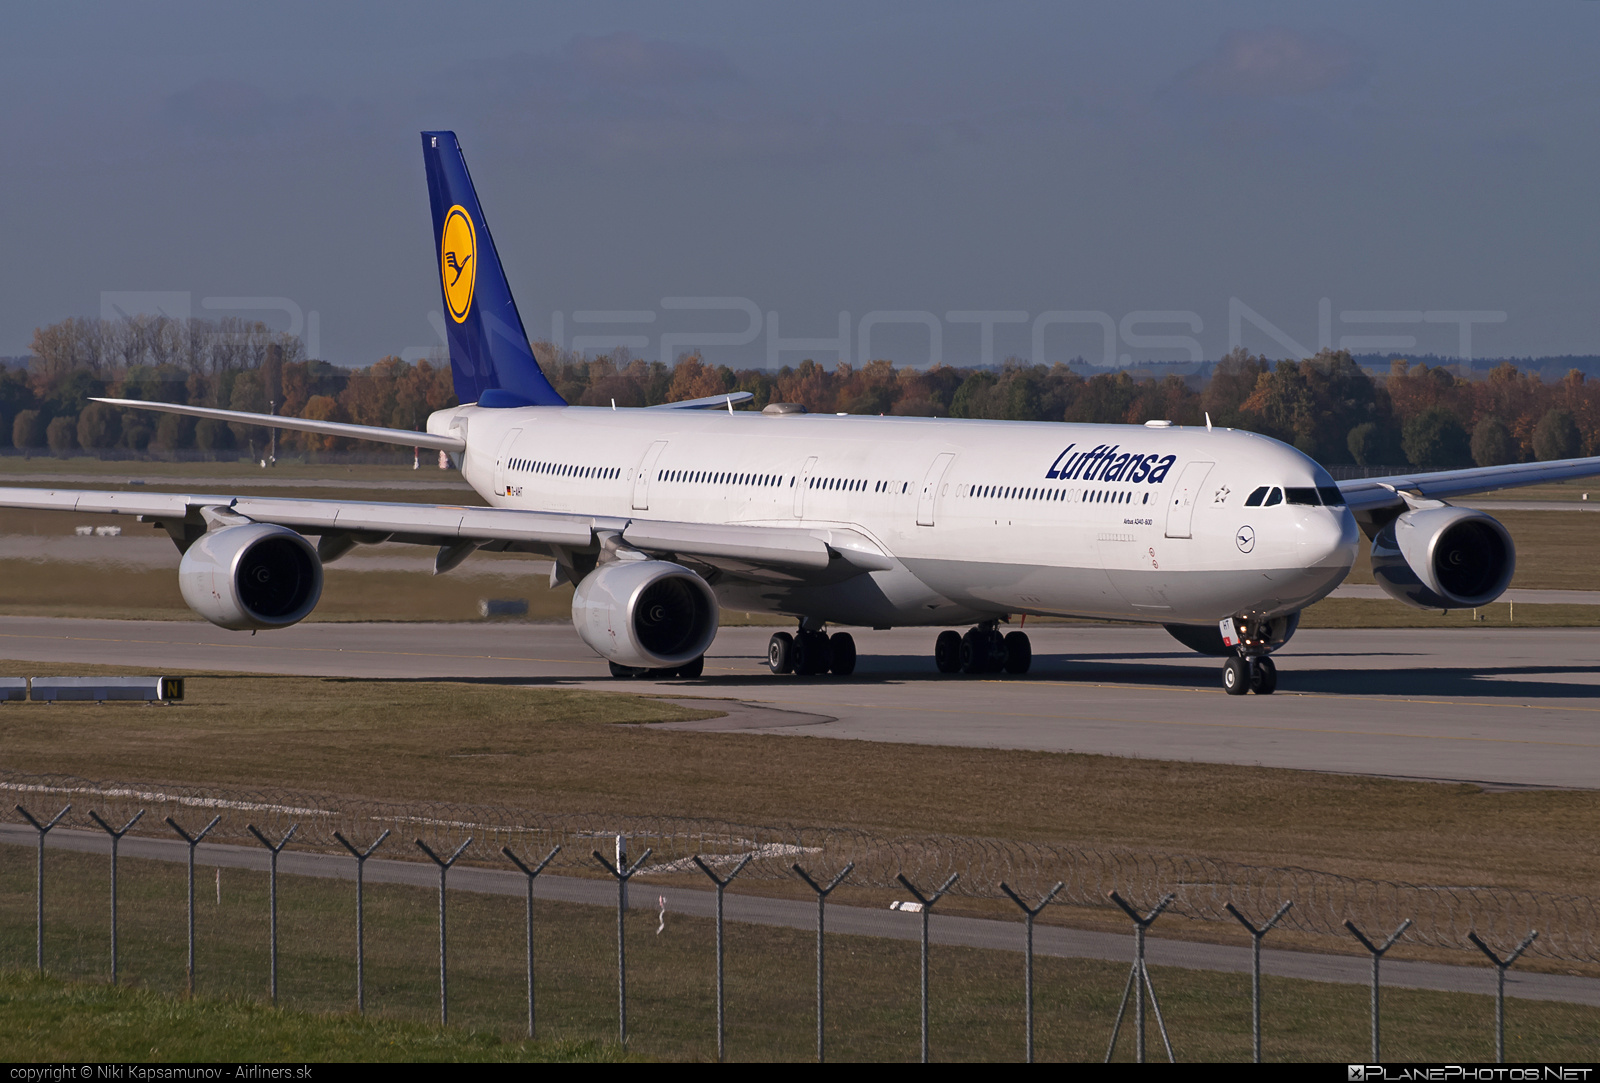 Airbus A340-642 - D-AIHT operated by Lufthansa #a340 #a340family #airbus #airbus340 #lufthansa